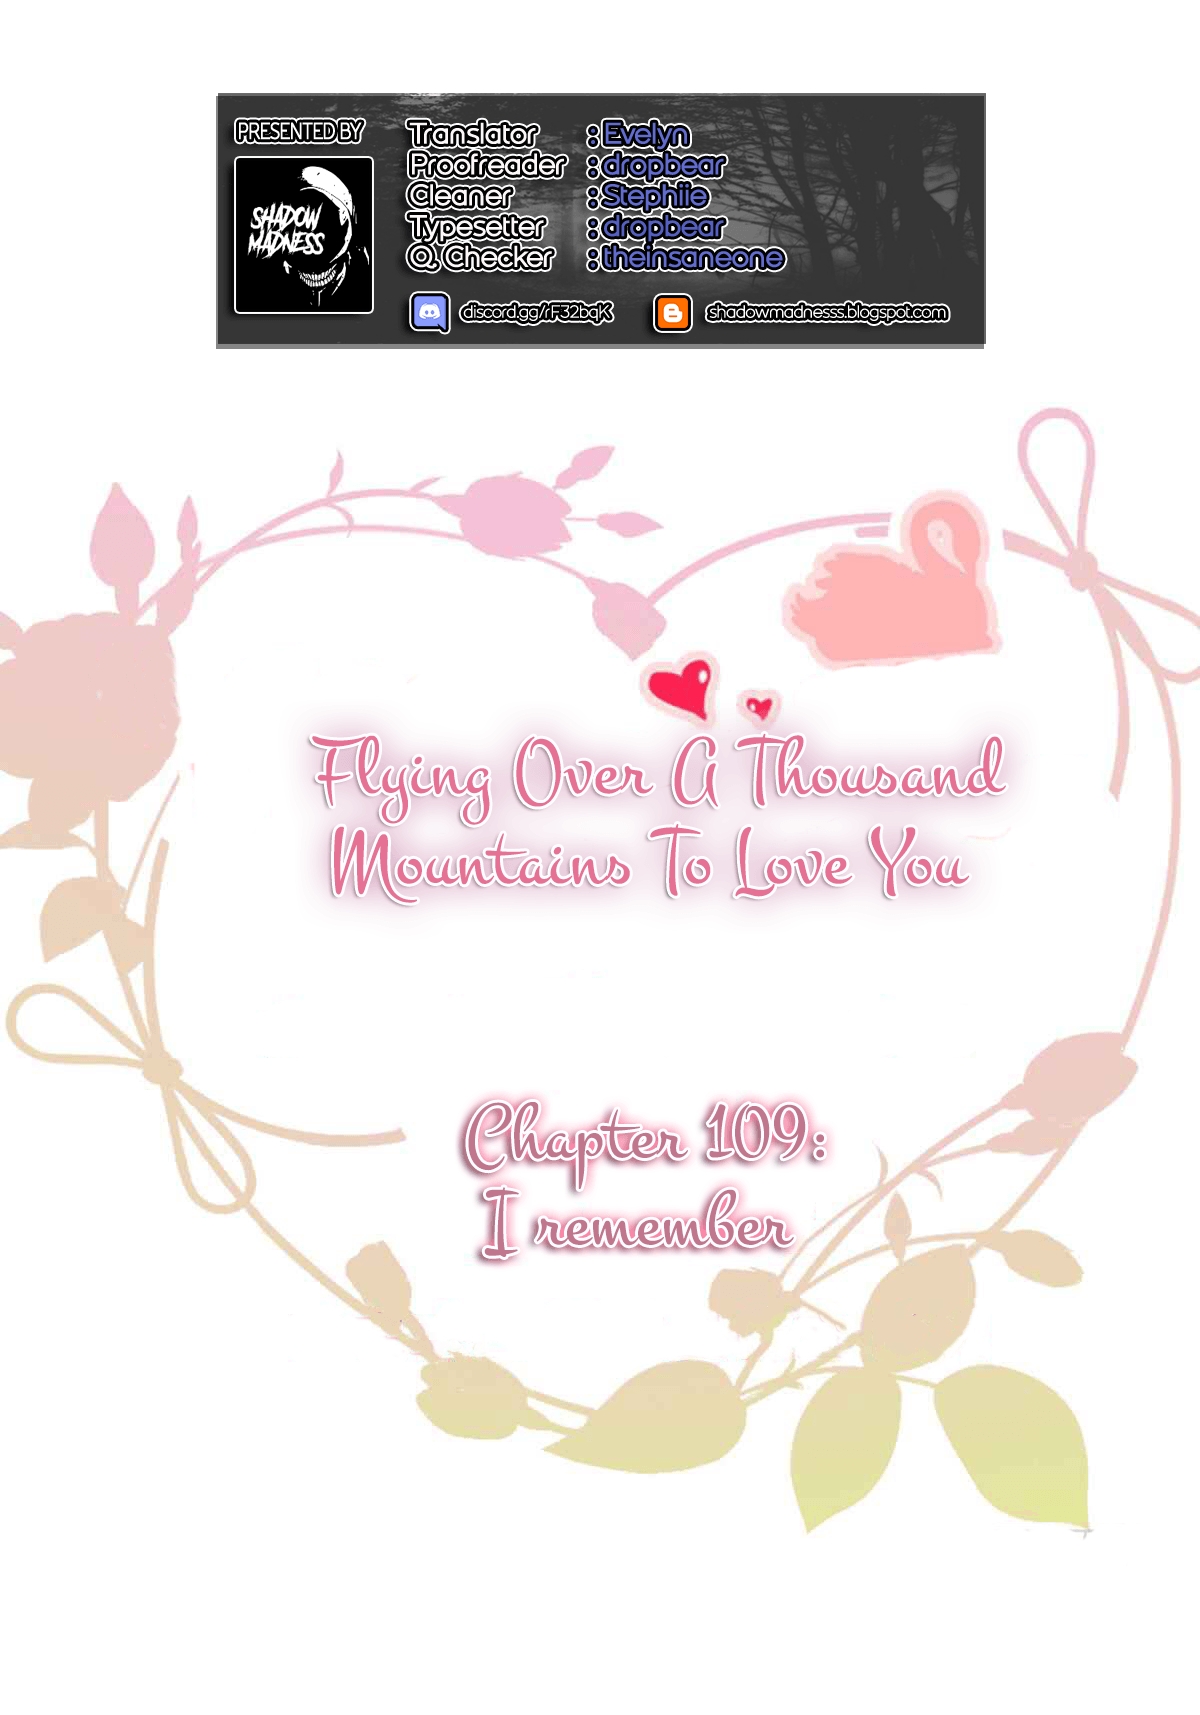 Flying Over a Thousand Mountains to Love You Ch. 109 I remember